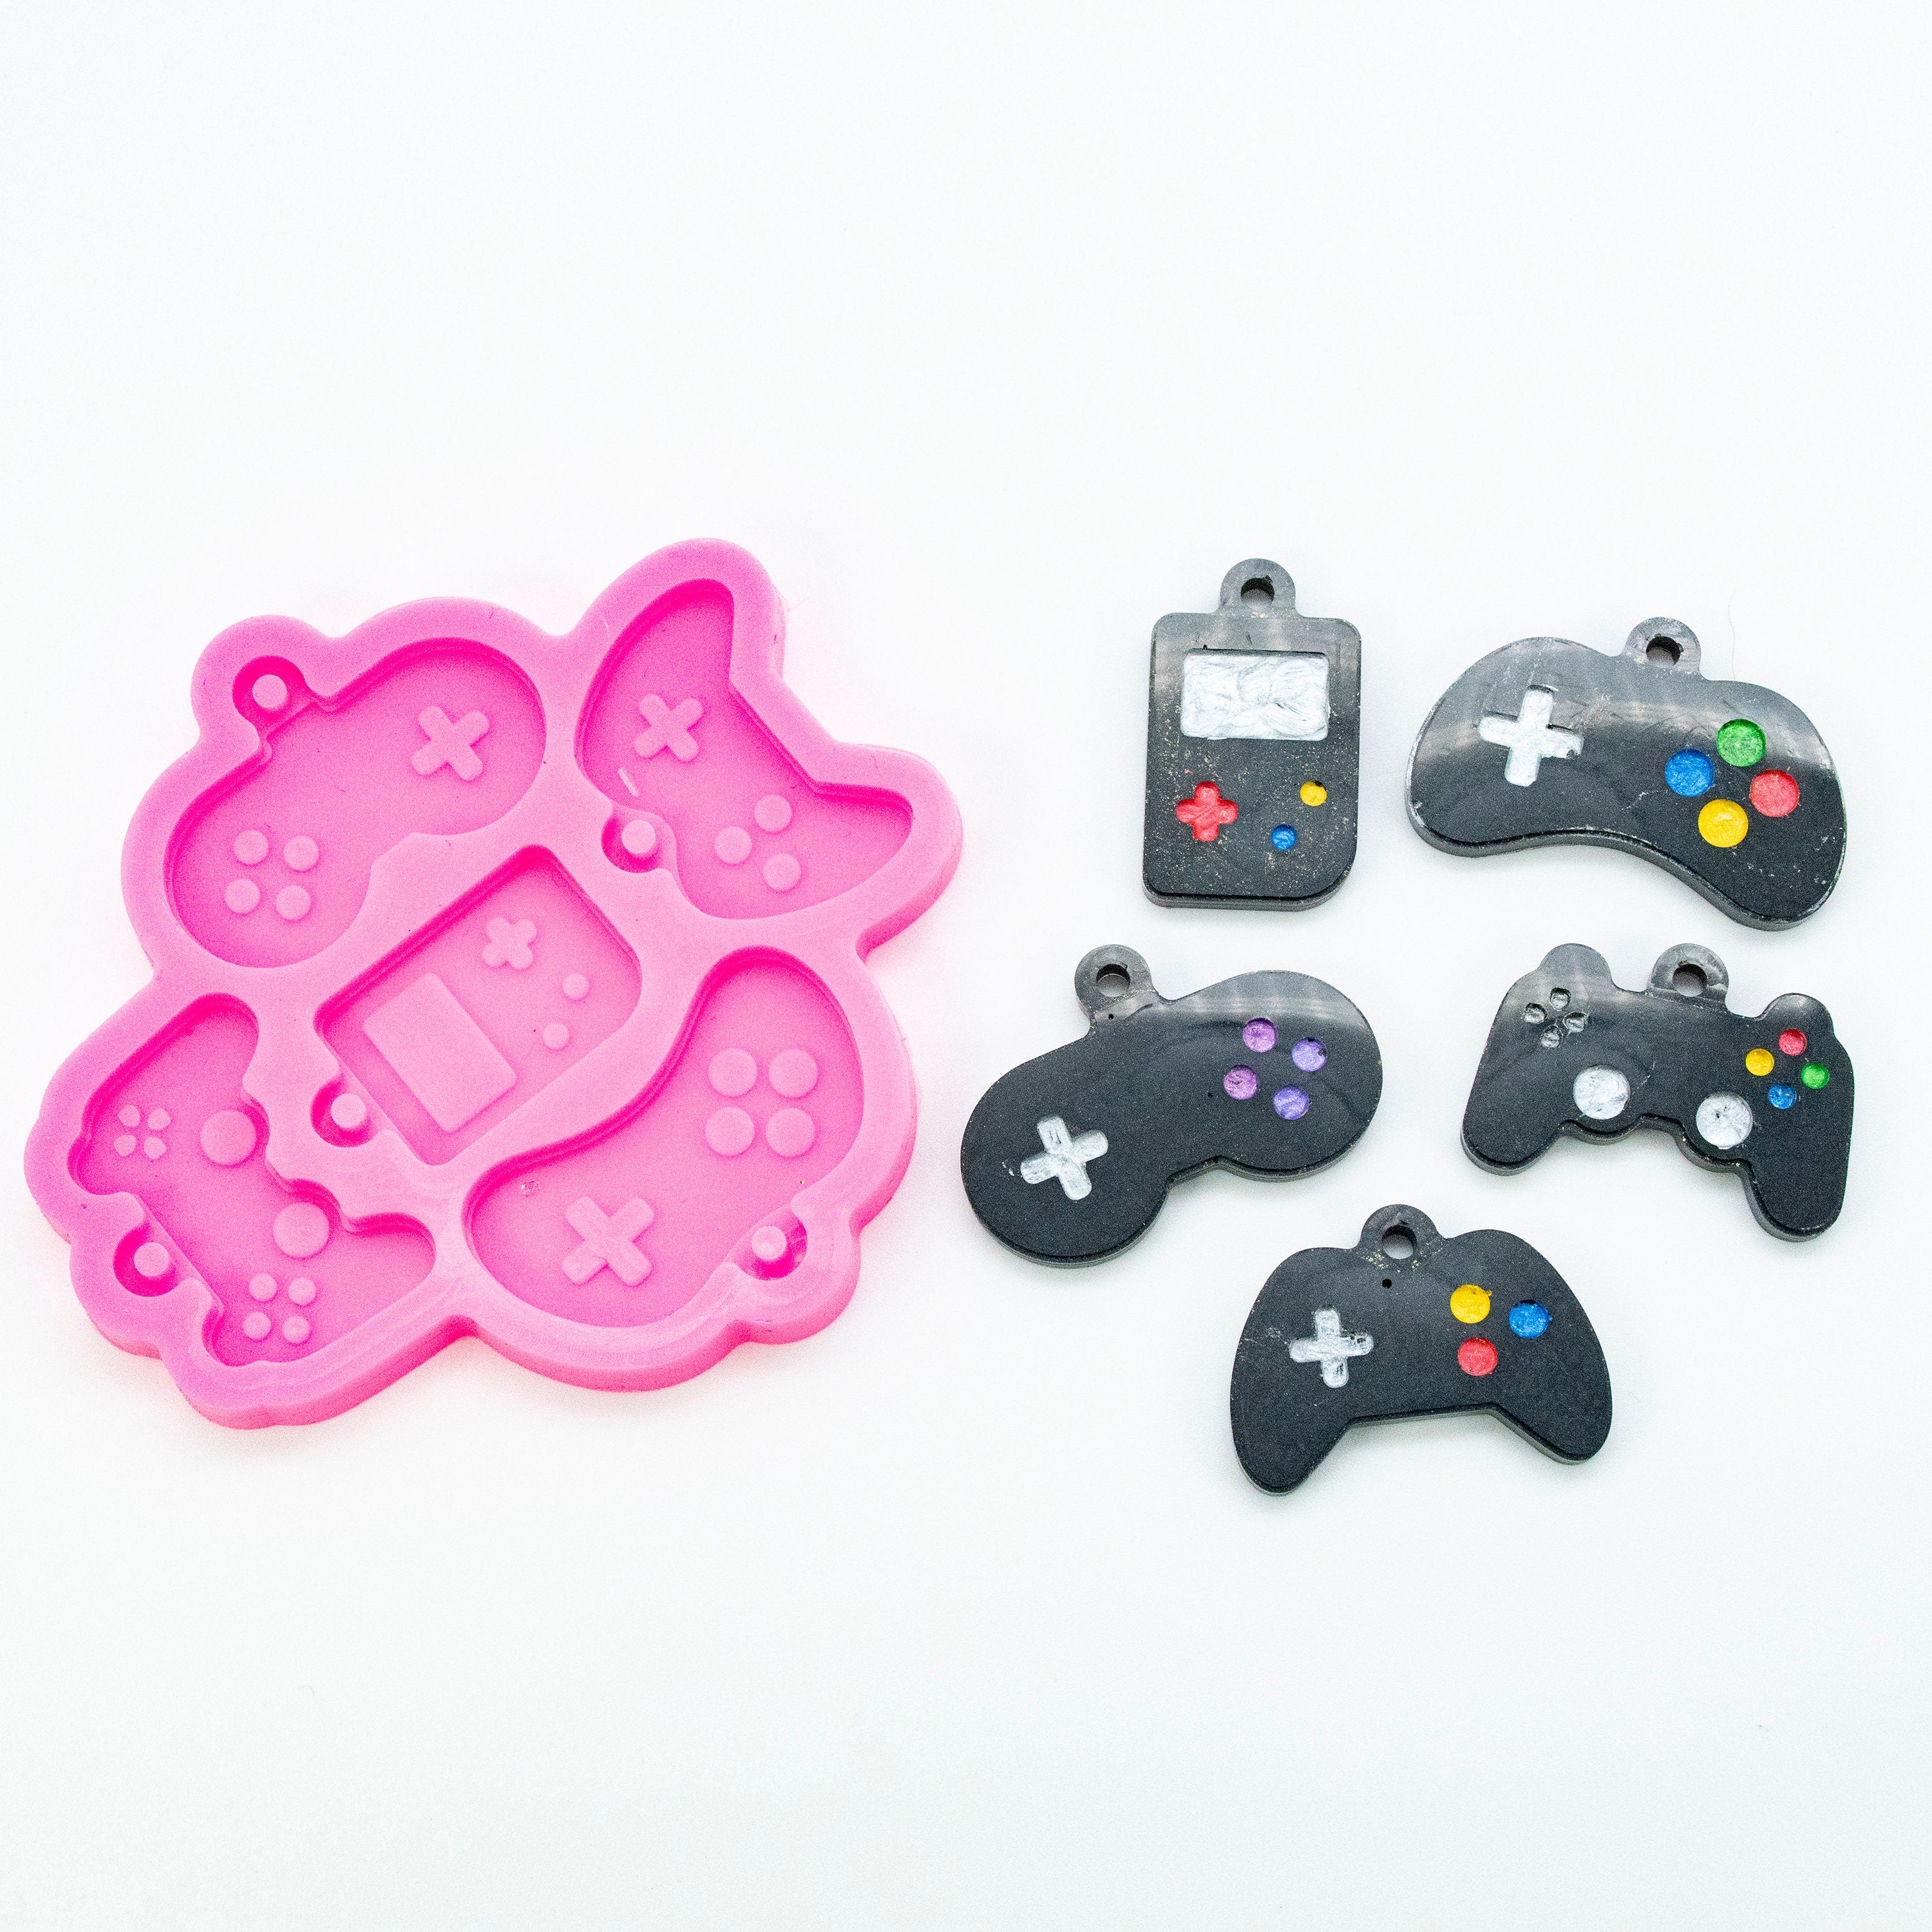 Gaming Controller Shiny Silicone Mold for Epoxy Resin Keychain - Jewelry Making - Ornament Silicone Mold